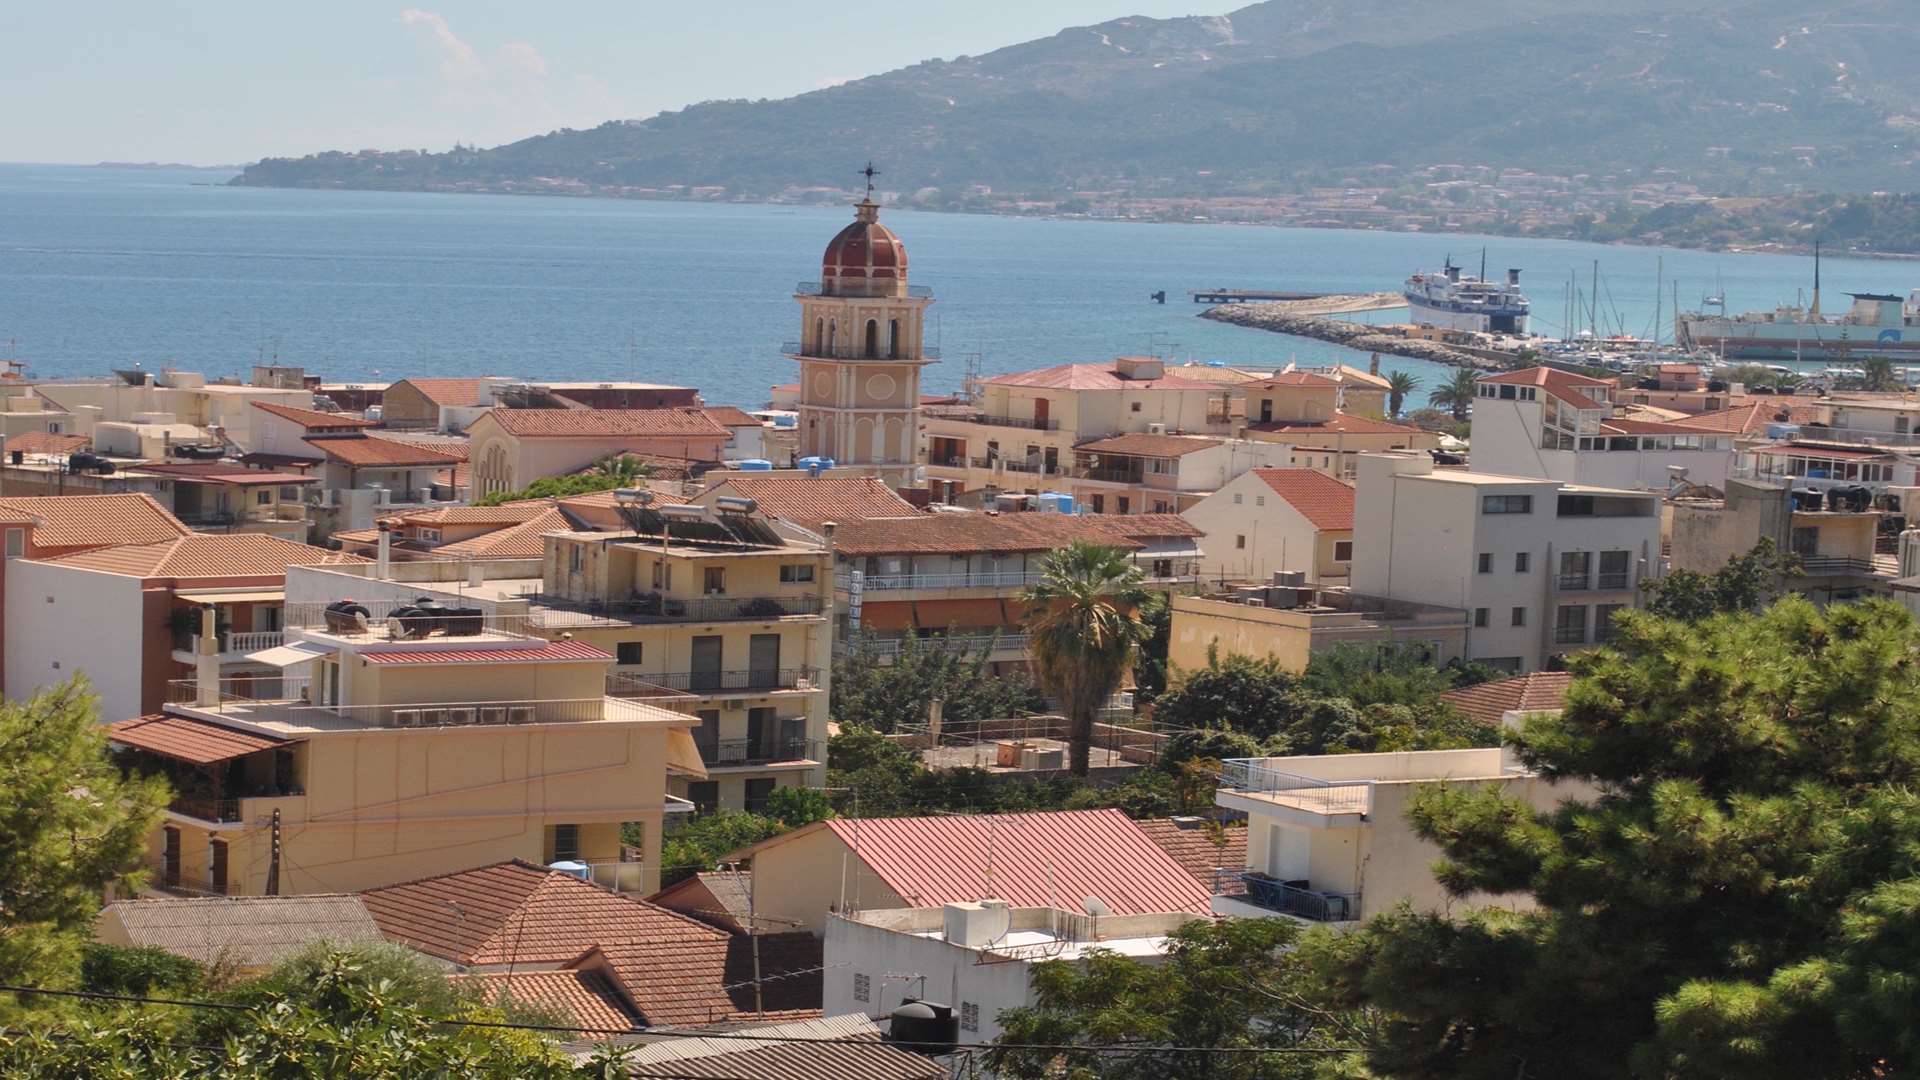 Zante Town, the port and capital of Zakynthos